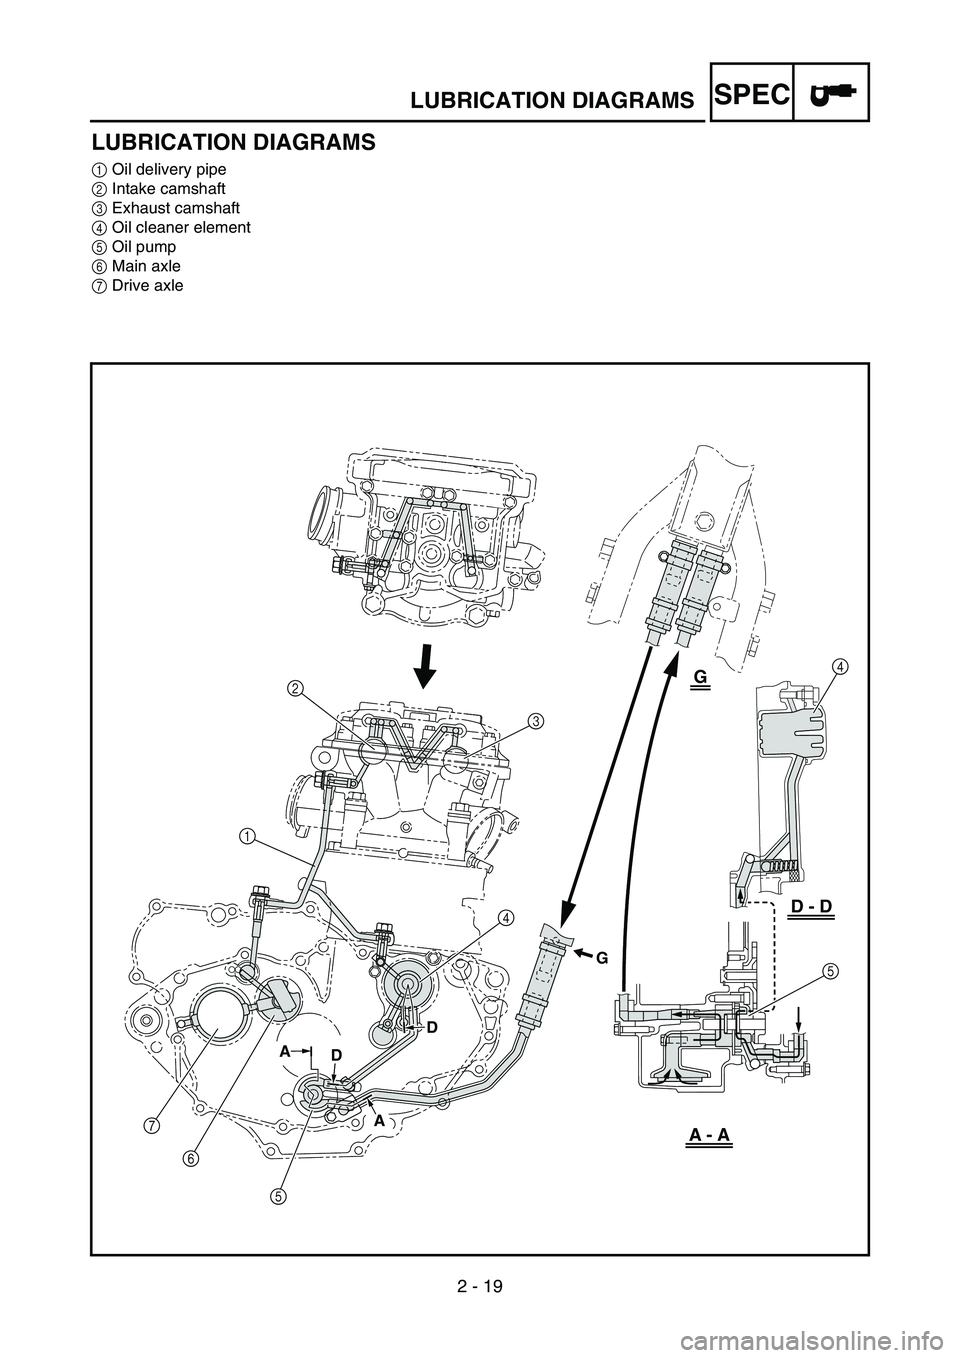 YAMAHA YZ450F 2005  Betriebsanleitungen (in German) 2 - 19
SPECLUBRICATION DIAGRAMS
LUBRICATION DIAGRAMS
1Oil delivery pipe
2Intake camshaft
3Exhaust camshaft
4Oil cleaner element
5Oil pump
6Main axle
7Drive axle
7
6
543 2
14
5
A - A
D - D
G
G
D
D A
A 